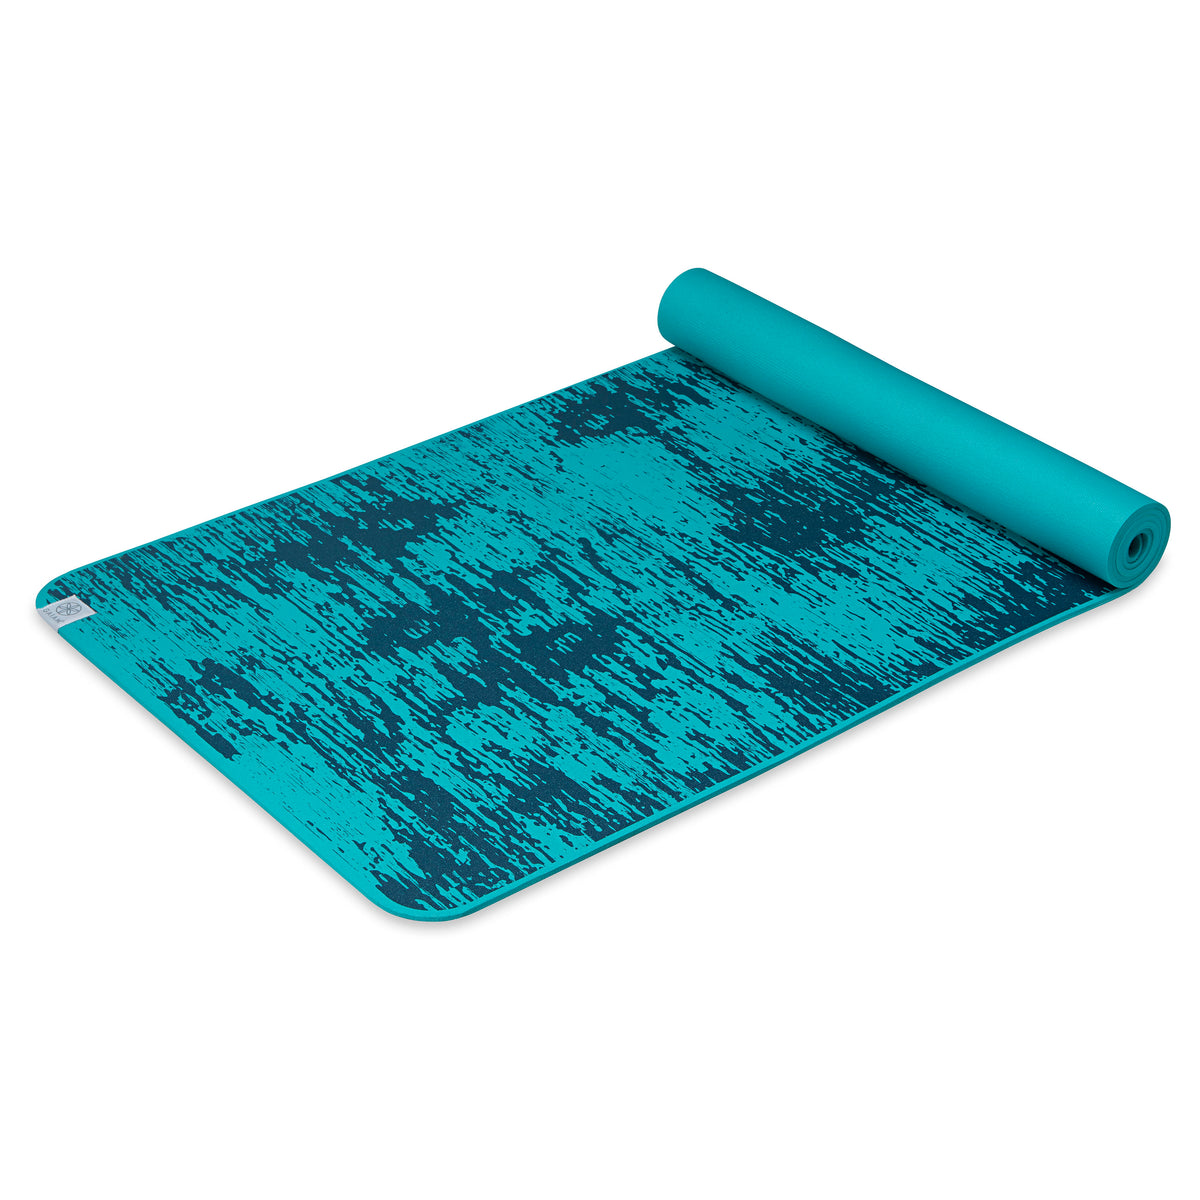 Premium Here and Now Yoga Mat (6mm)